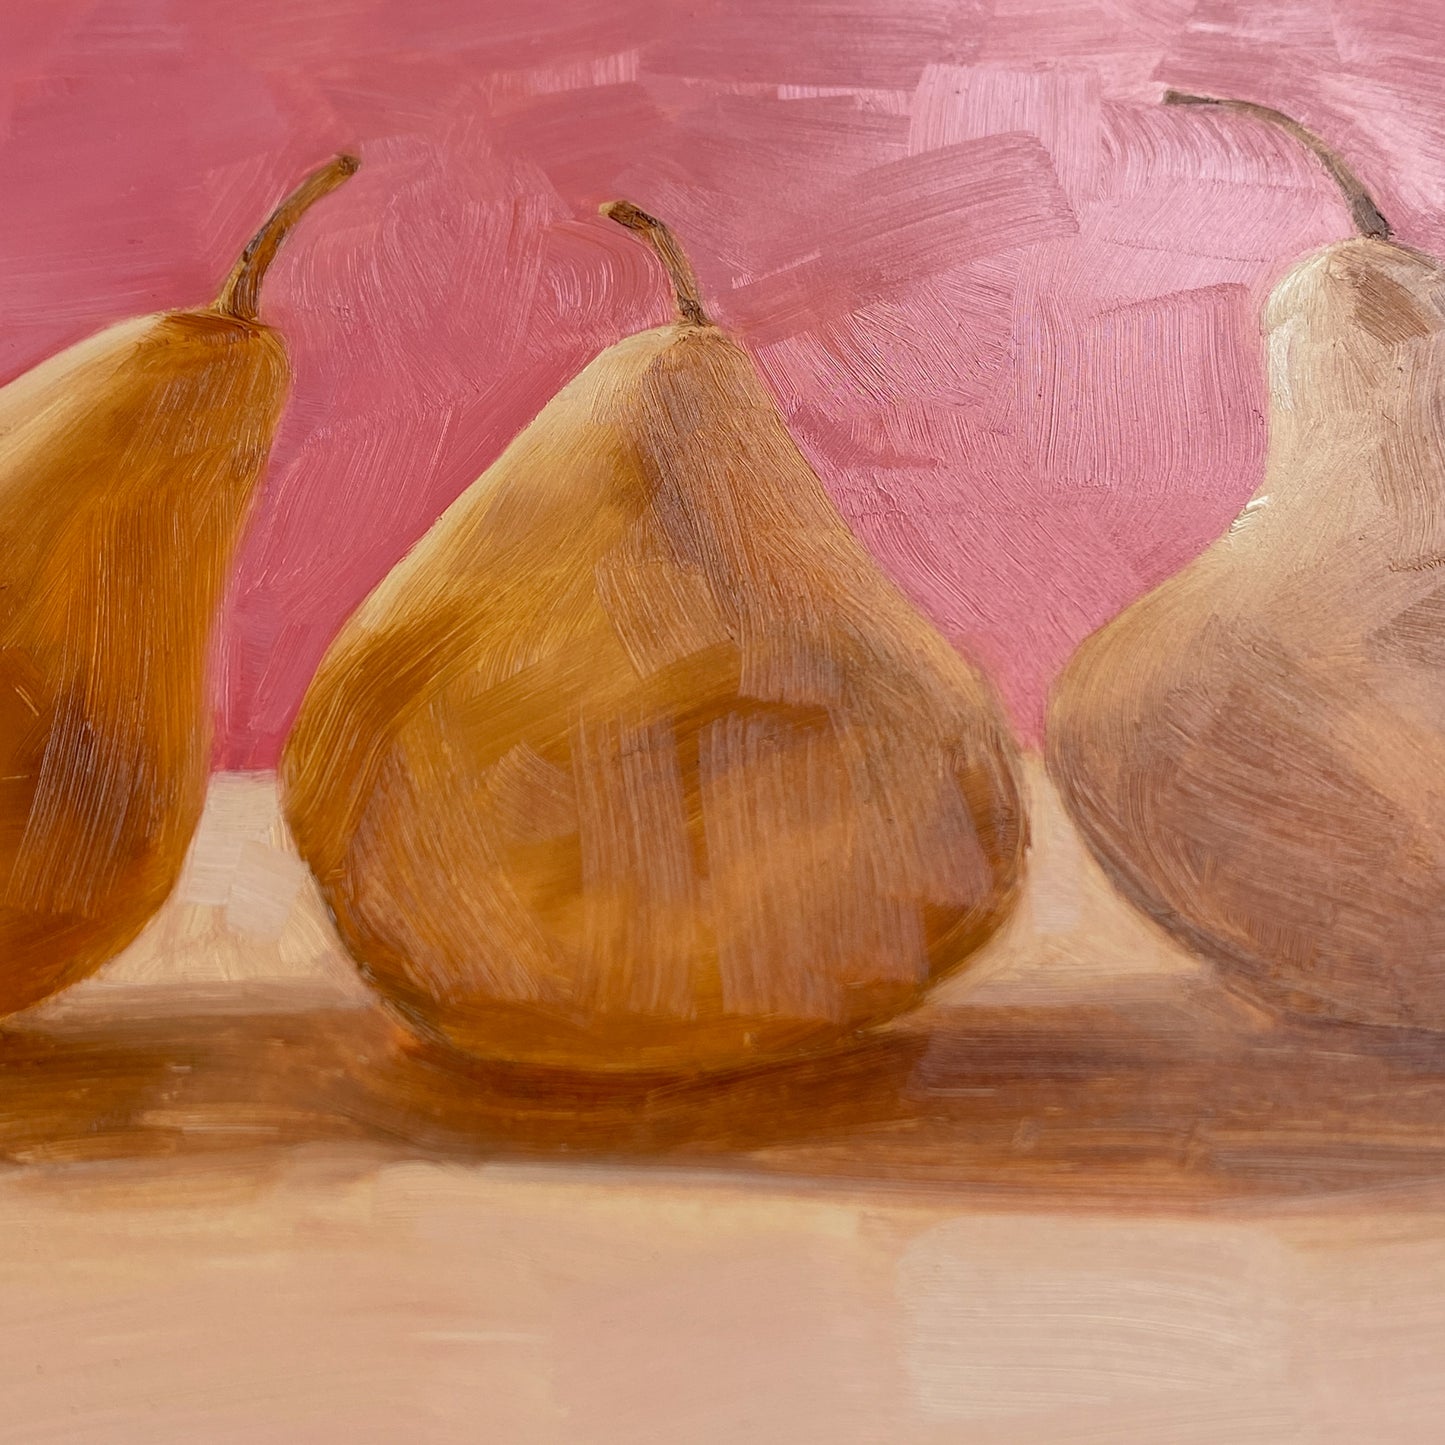 closeup of original oil paintings of three beurre Bosc pears on a warm pink and creamy background where you can see the light reflected on the brushstrokes